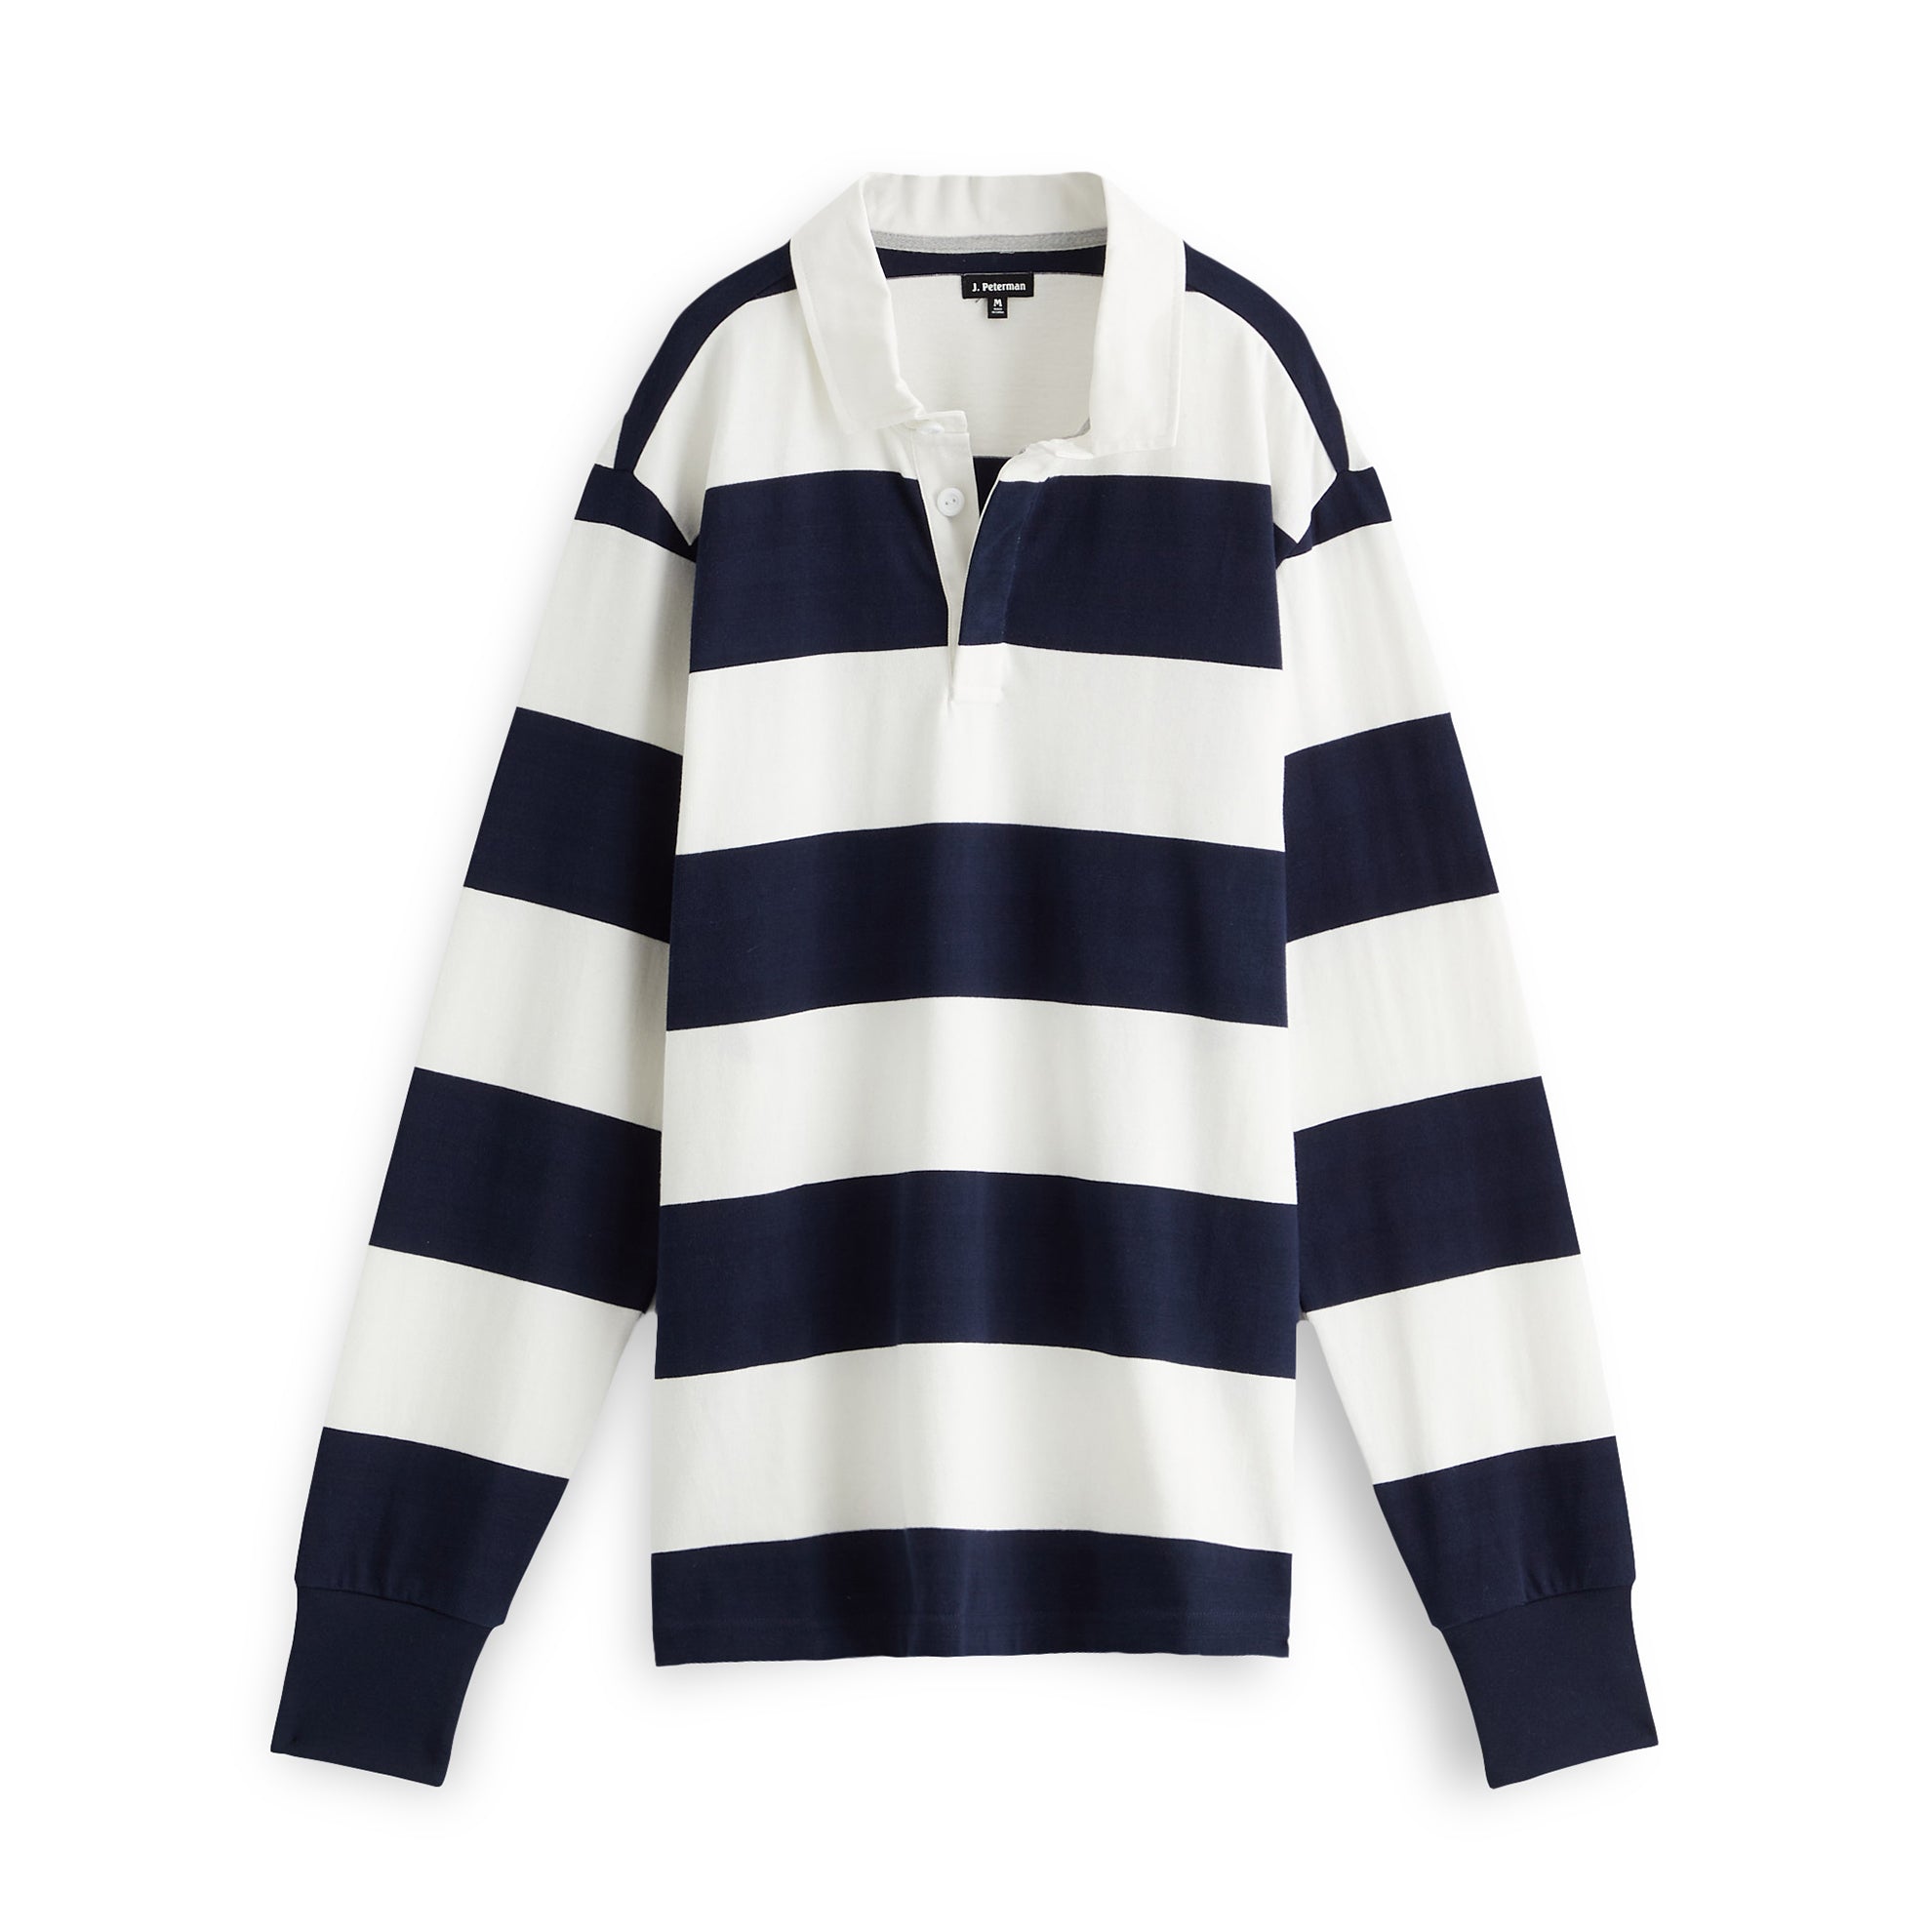 Rugby Jersey – The J. Peterman Company